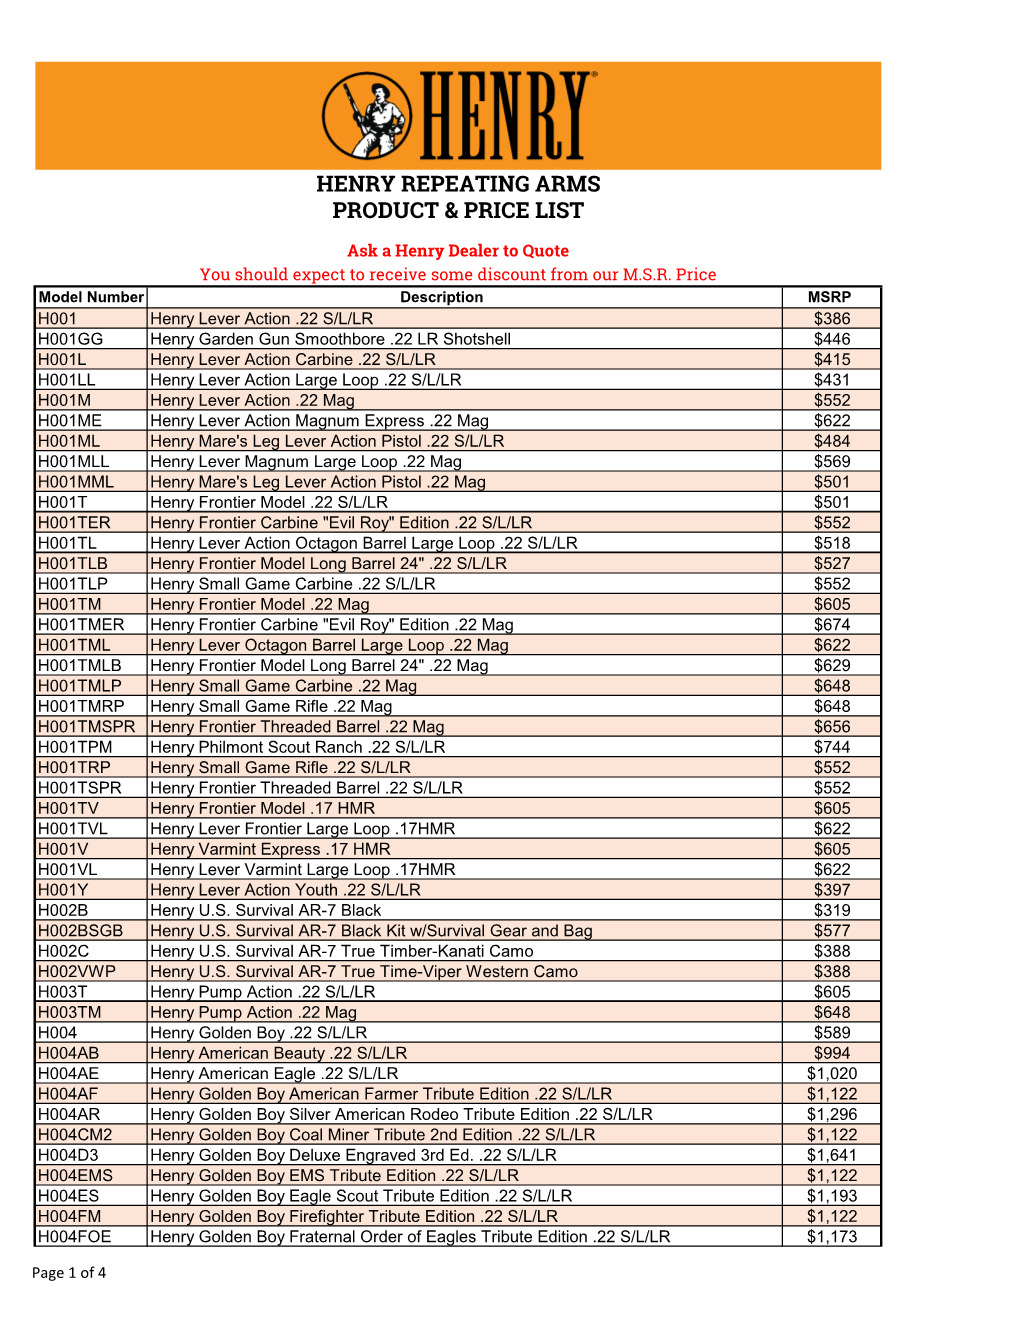 Henry Repeating Arms Product & Price List